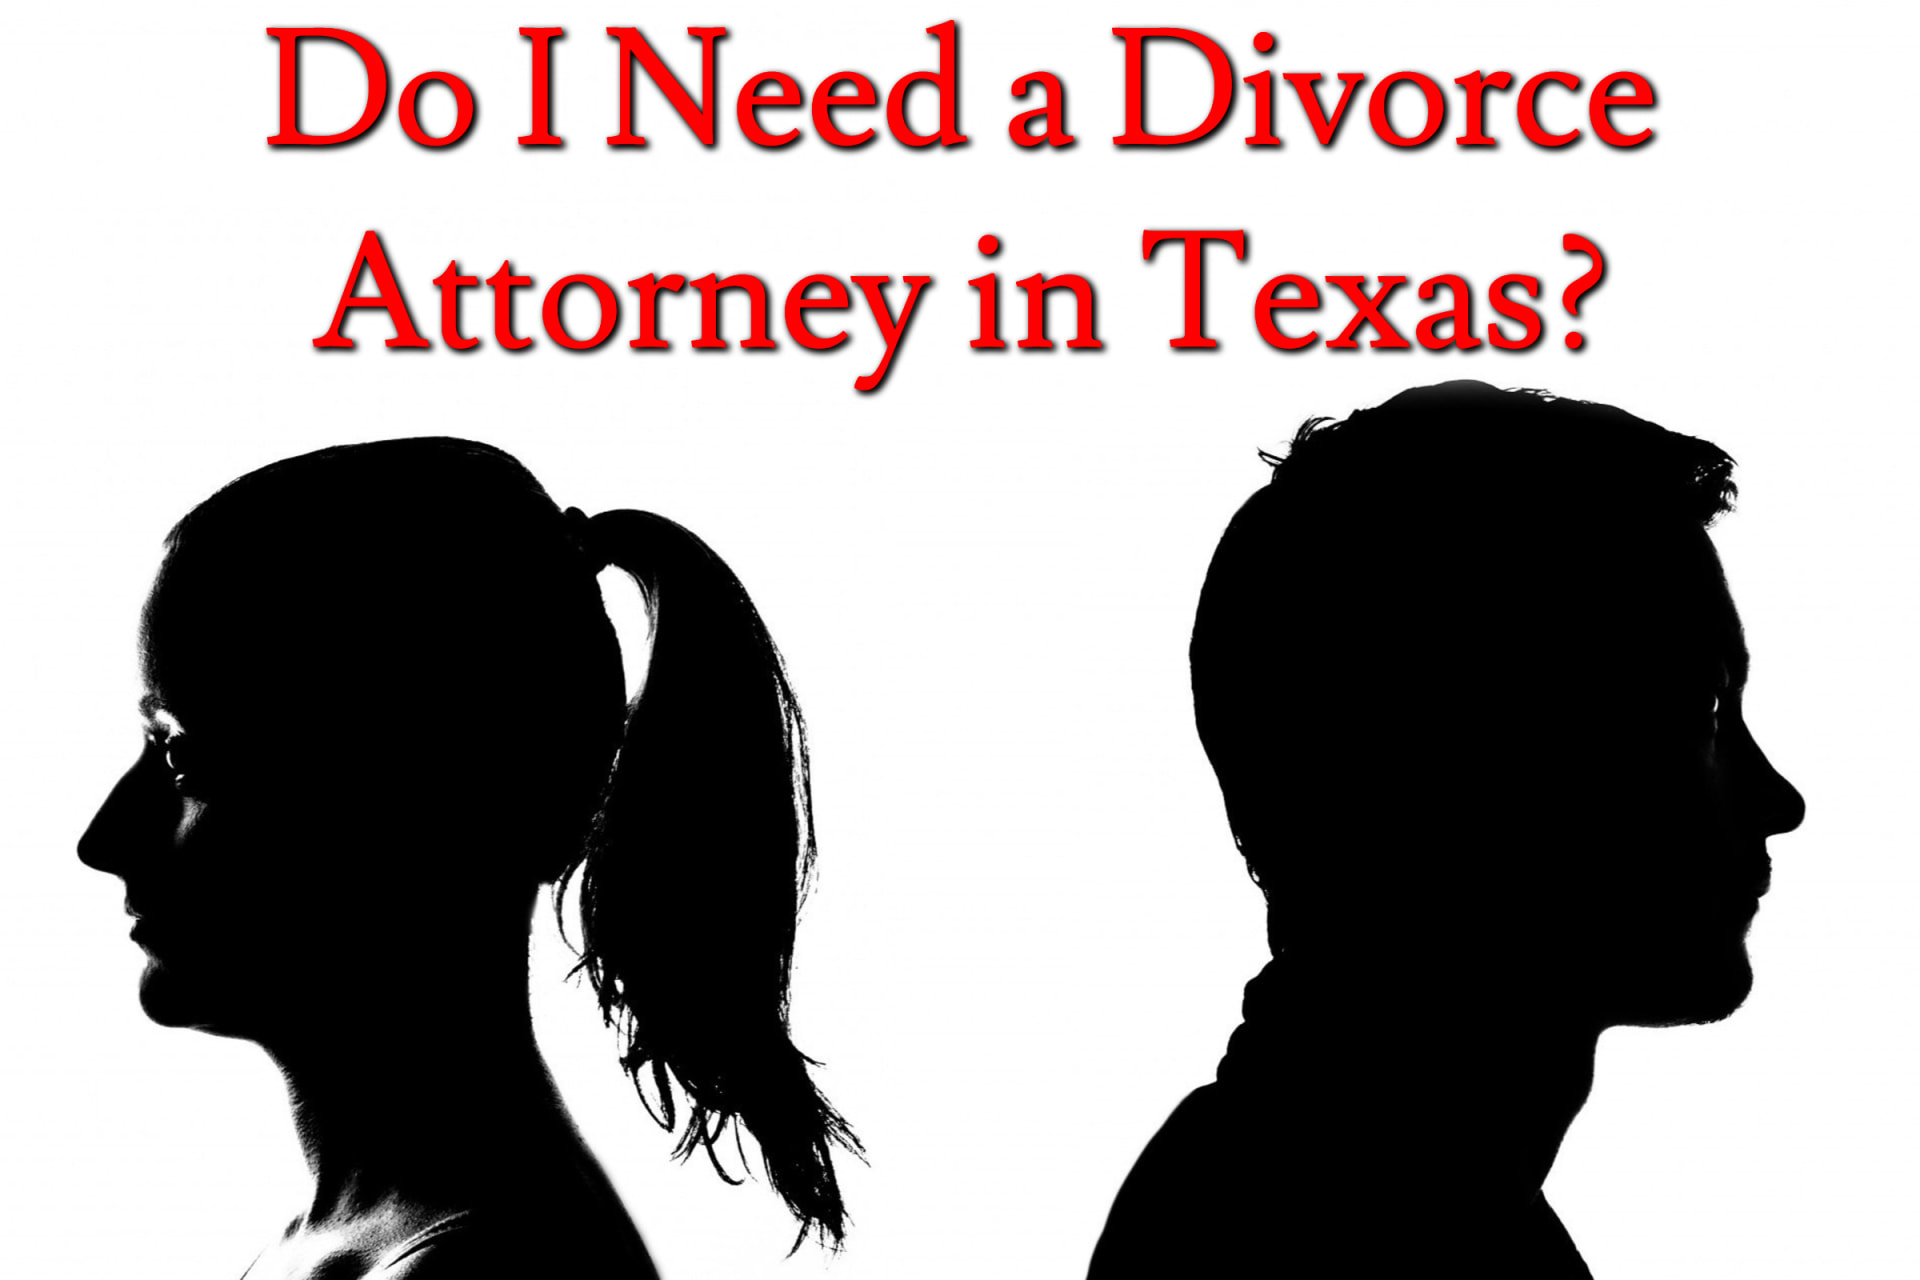 A silhouette of a man and woman's heads facing away from each other with the text "Do I Need a Divorce Attorney in Texas?"